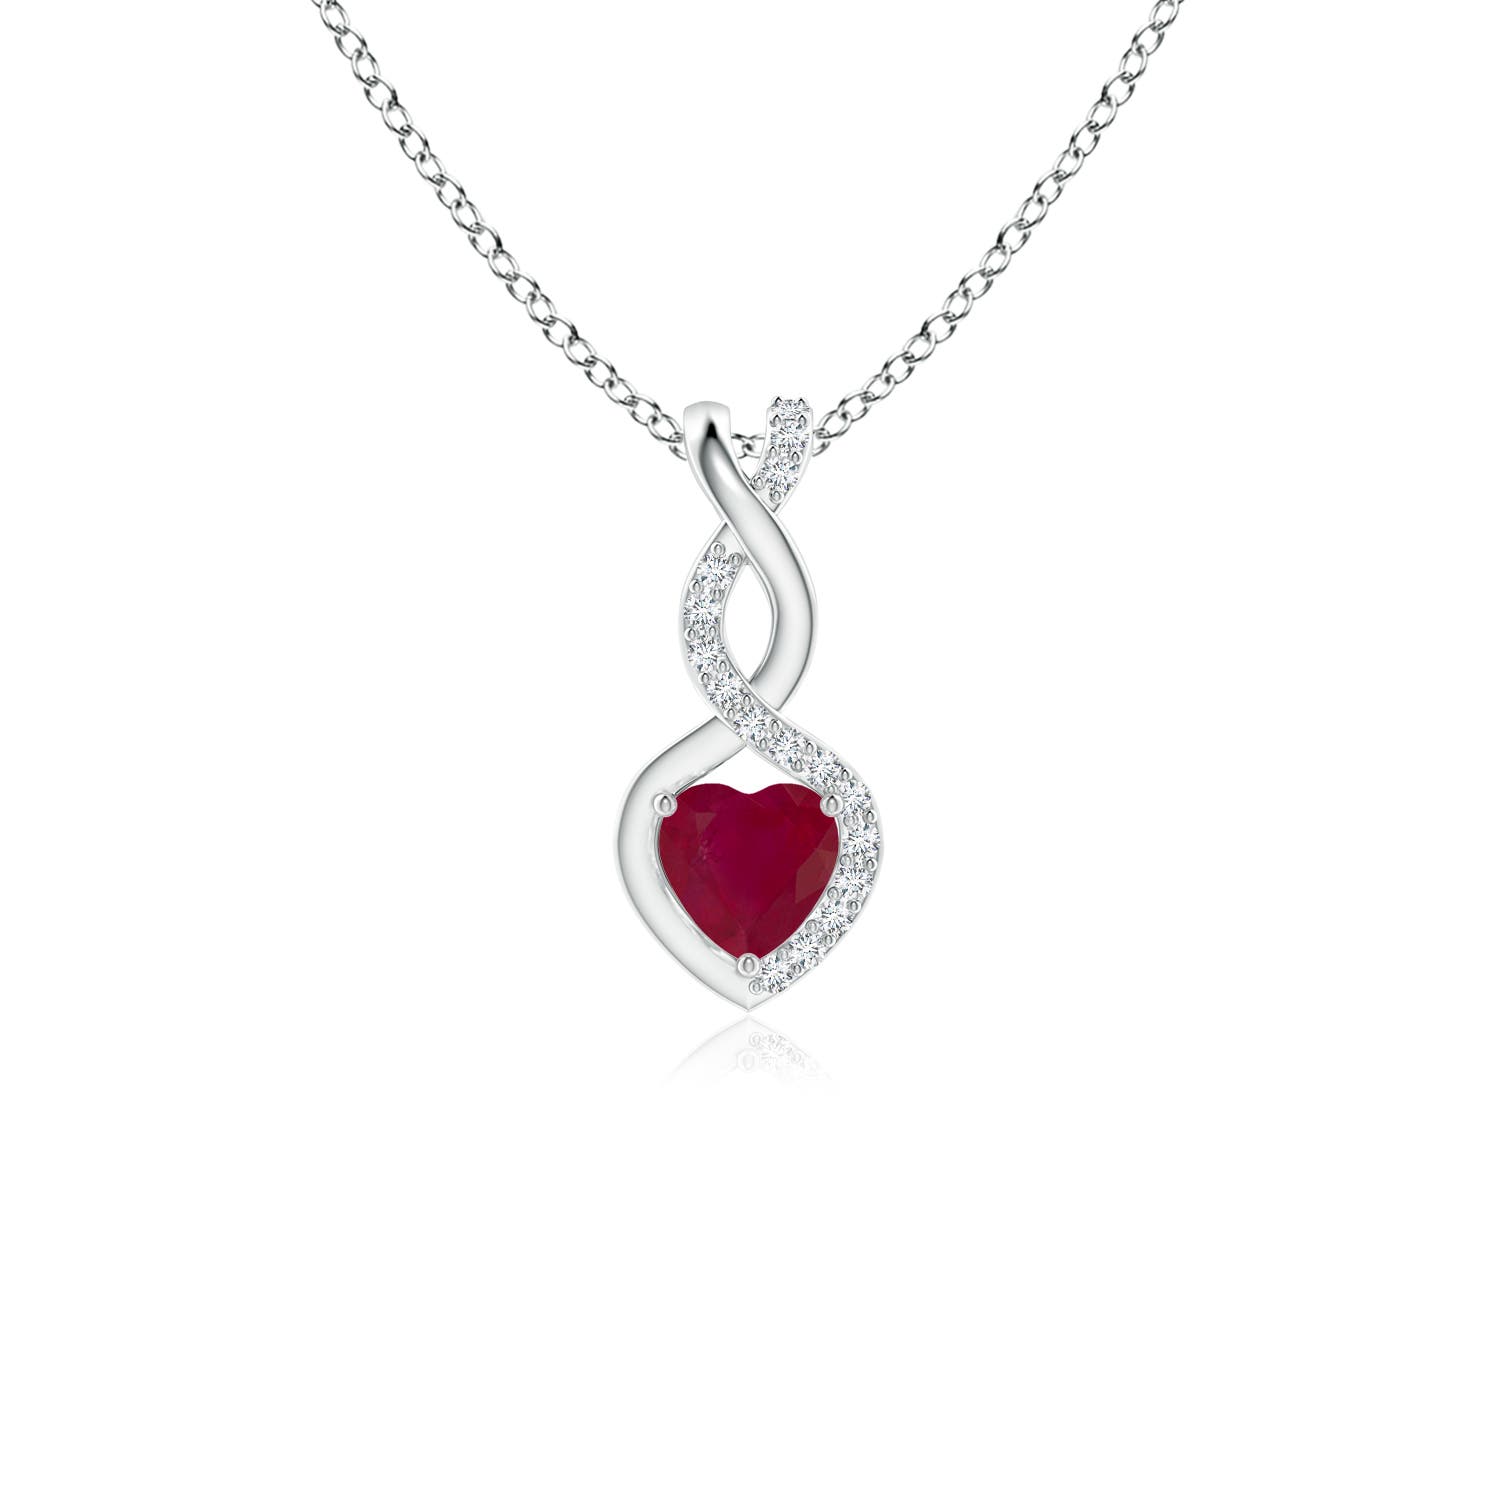 A - Ruby / 0.35 CT / 14 KT White Gold